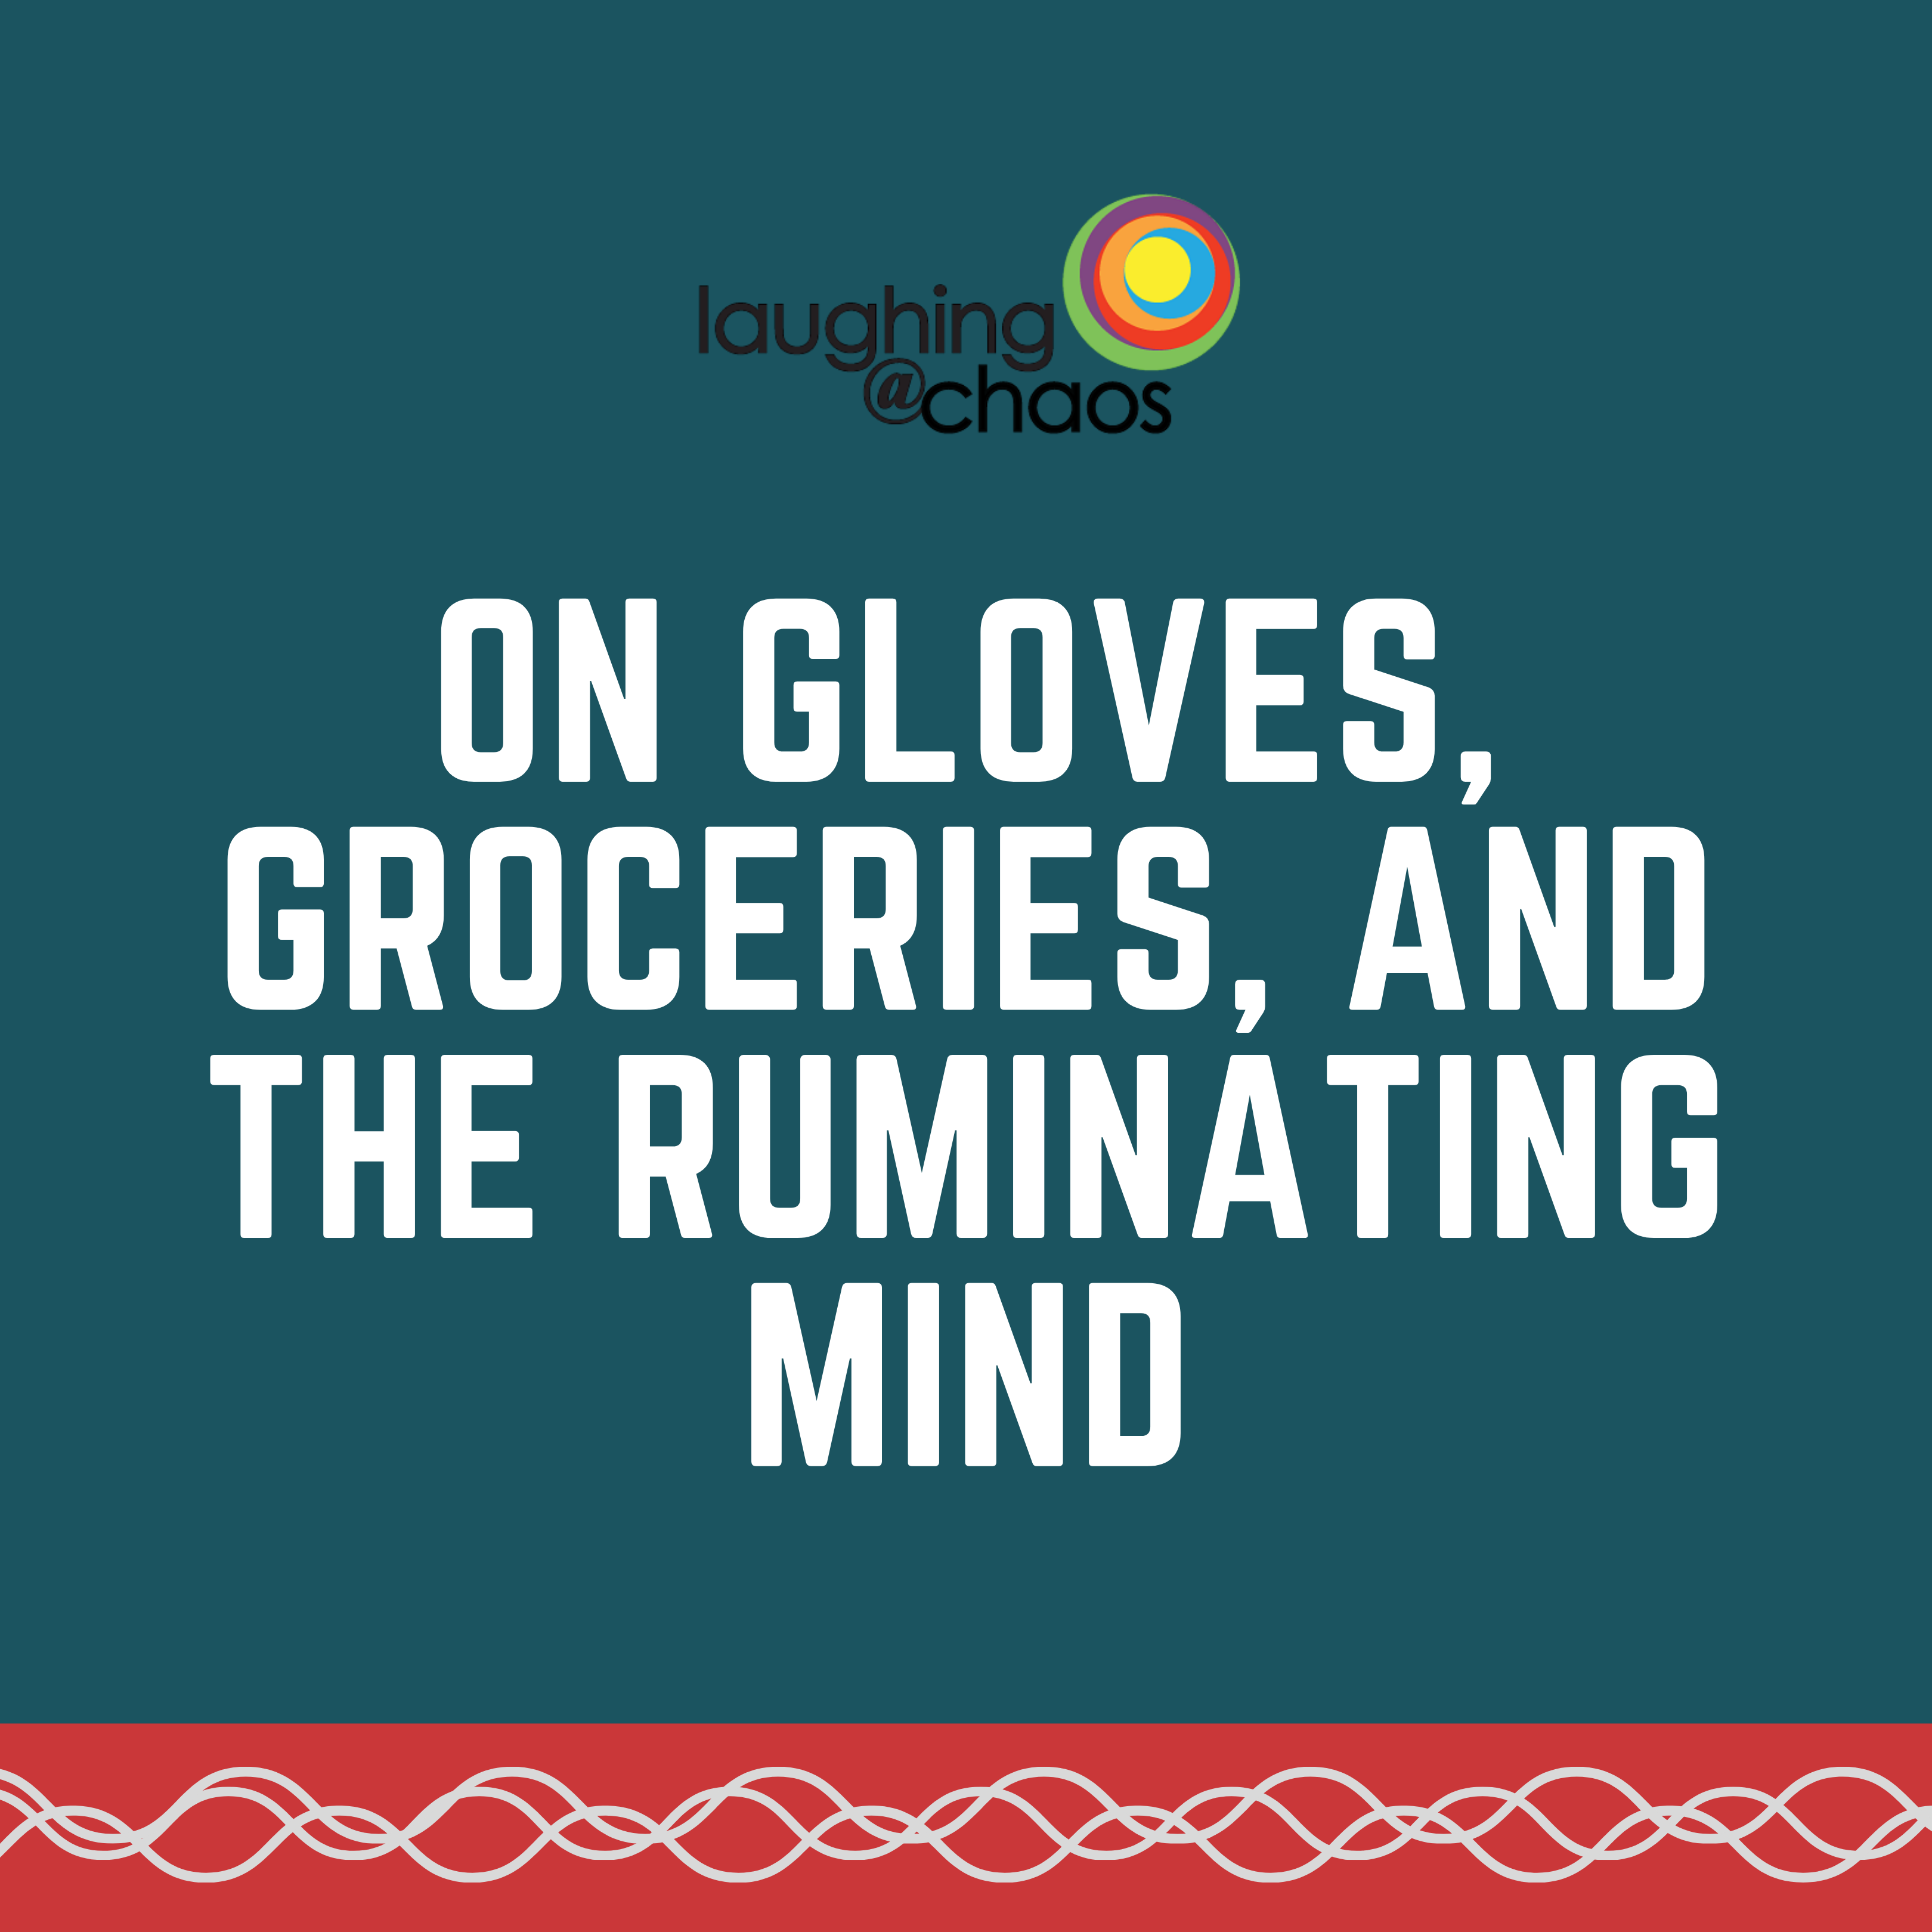 On gloves, groceries, and the ruminating mind